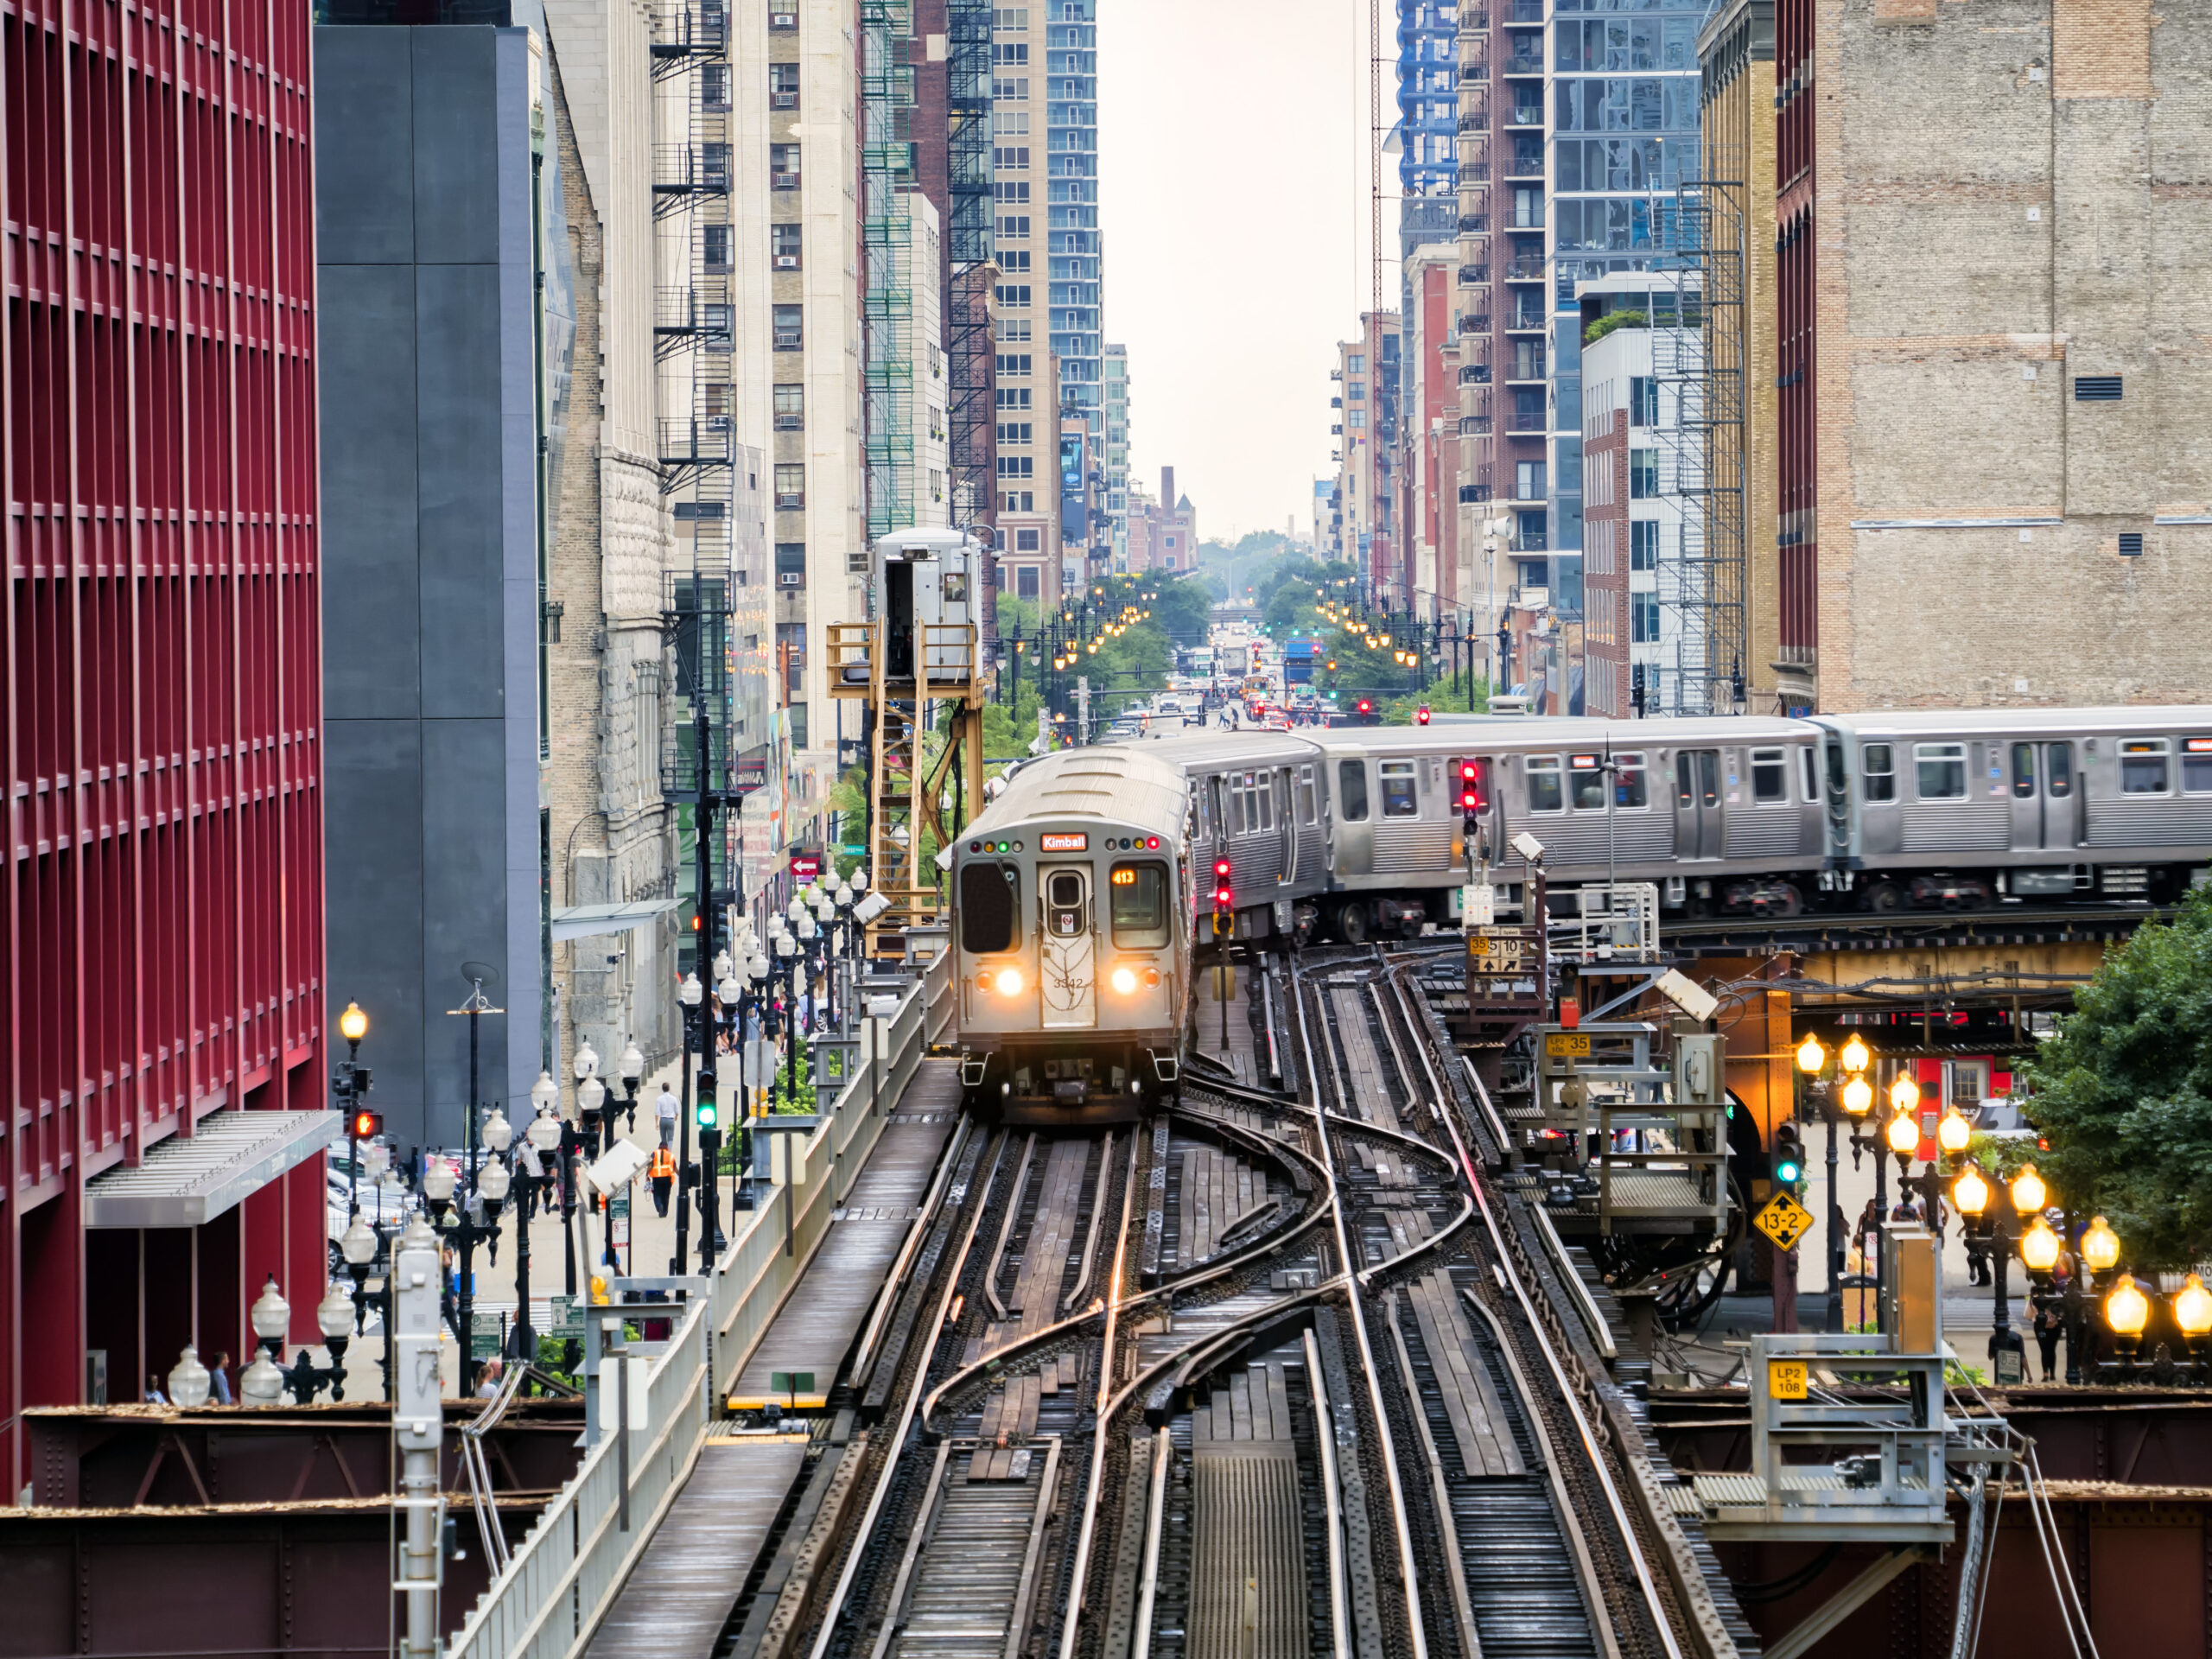 Subway train in the city of Chicago